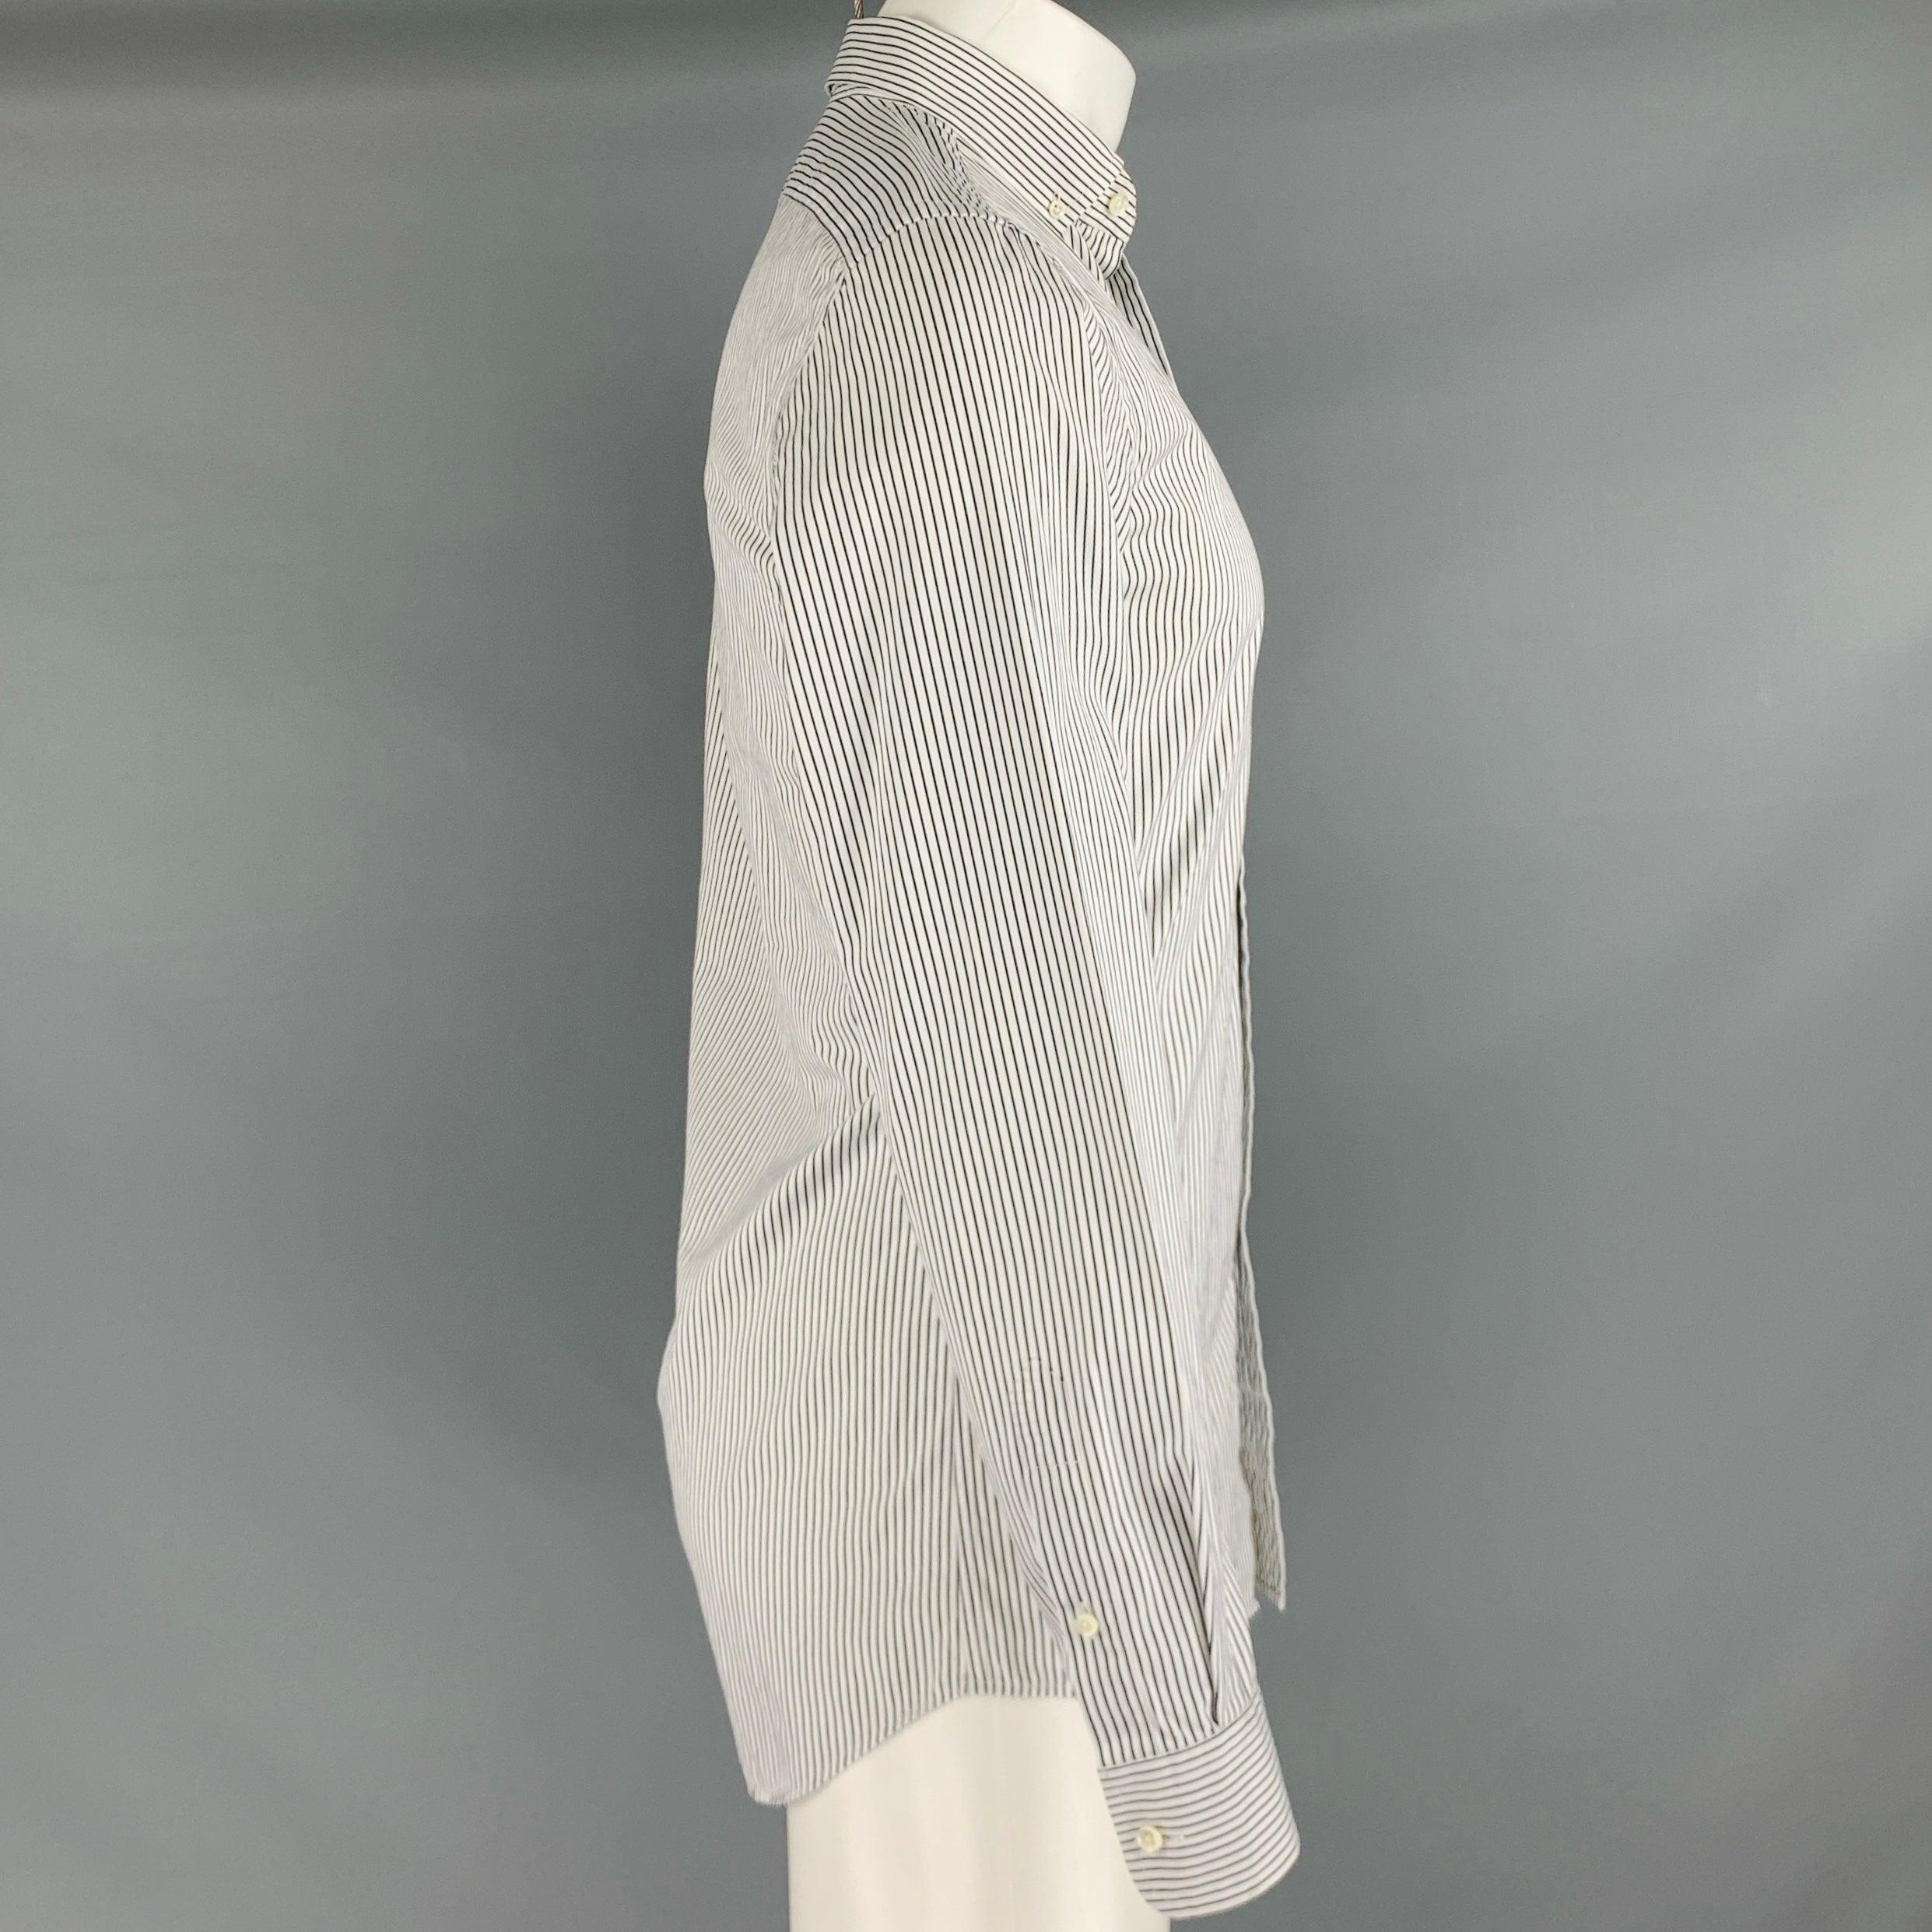 RALPH LAUREN BLACK LABEL long sleeve shirt
in a black and white cotton fabric featuring vertical stripe pattern, button-down collar, and button closure. Made in Italy.Very Good Pre-Owned Condition. Minor marks. 

Marked:   15 

Measurements: 
